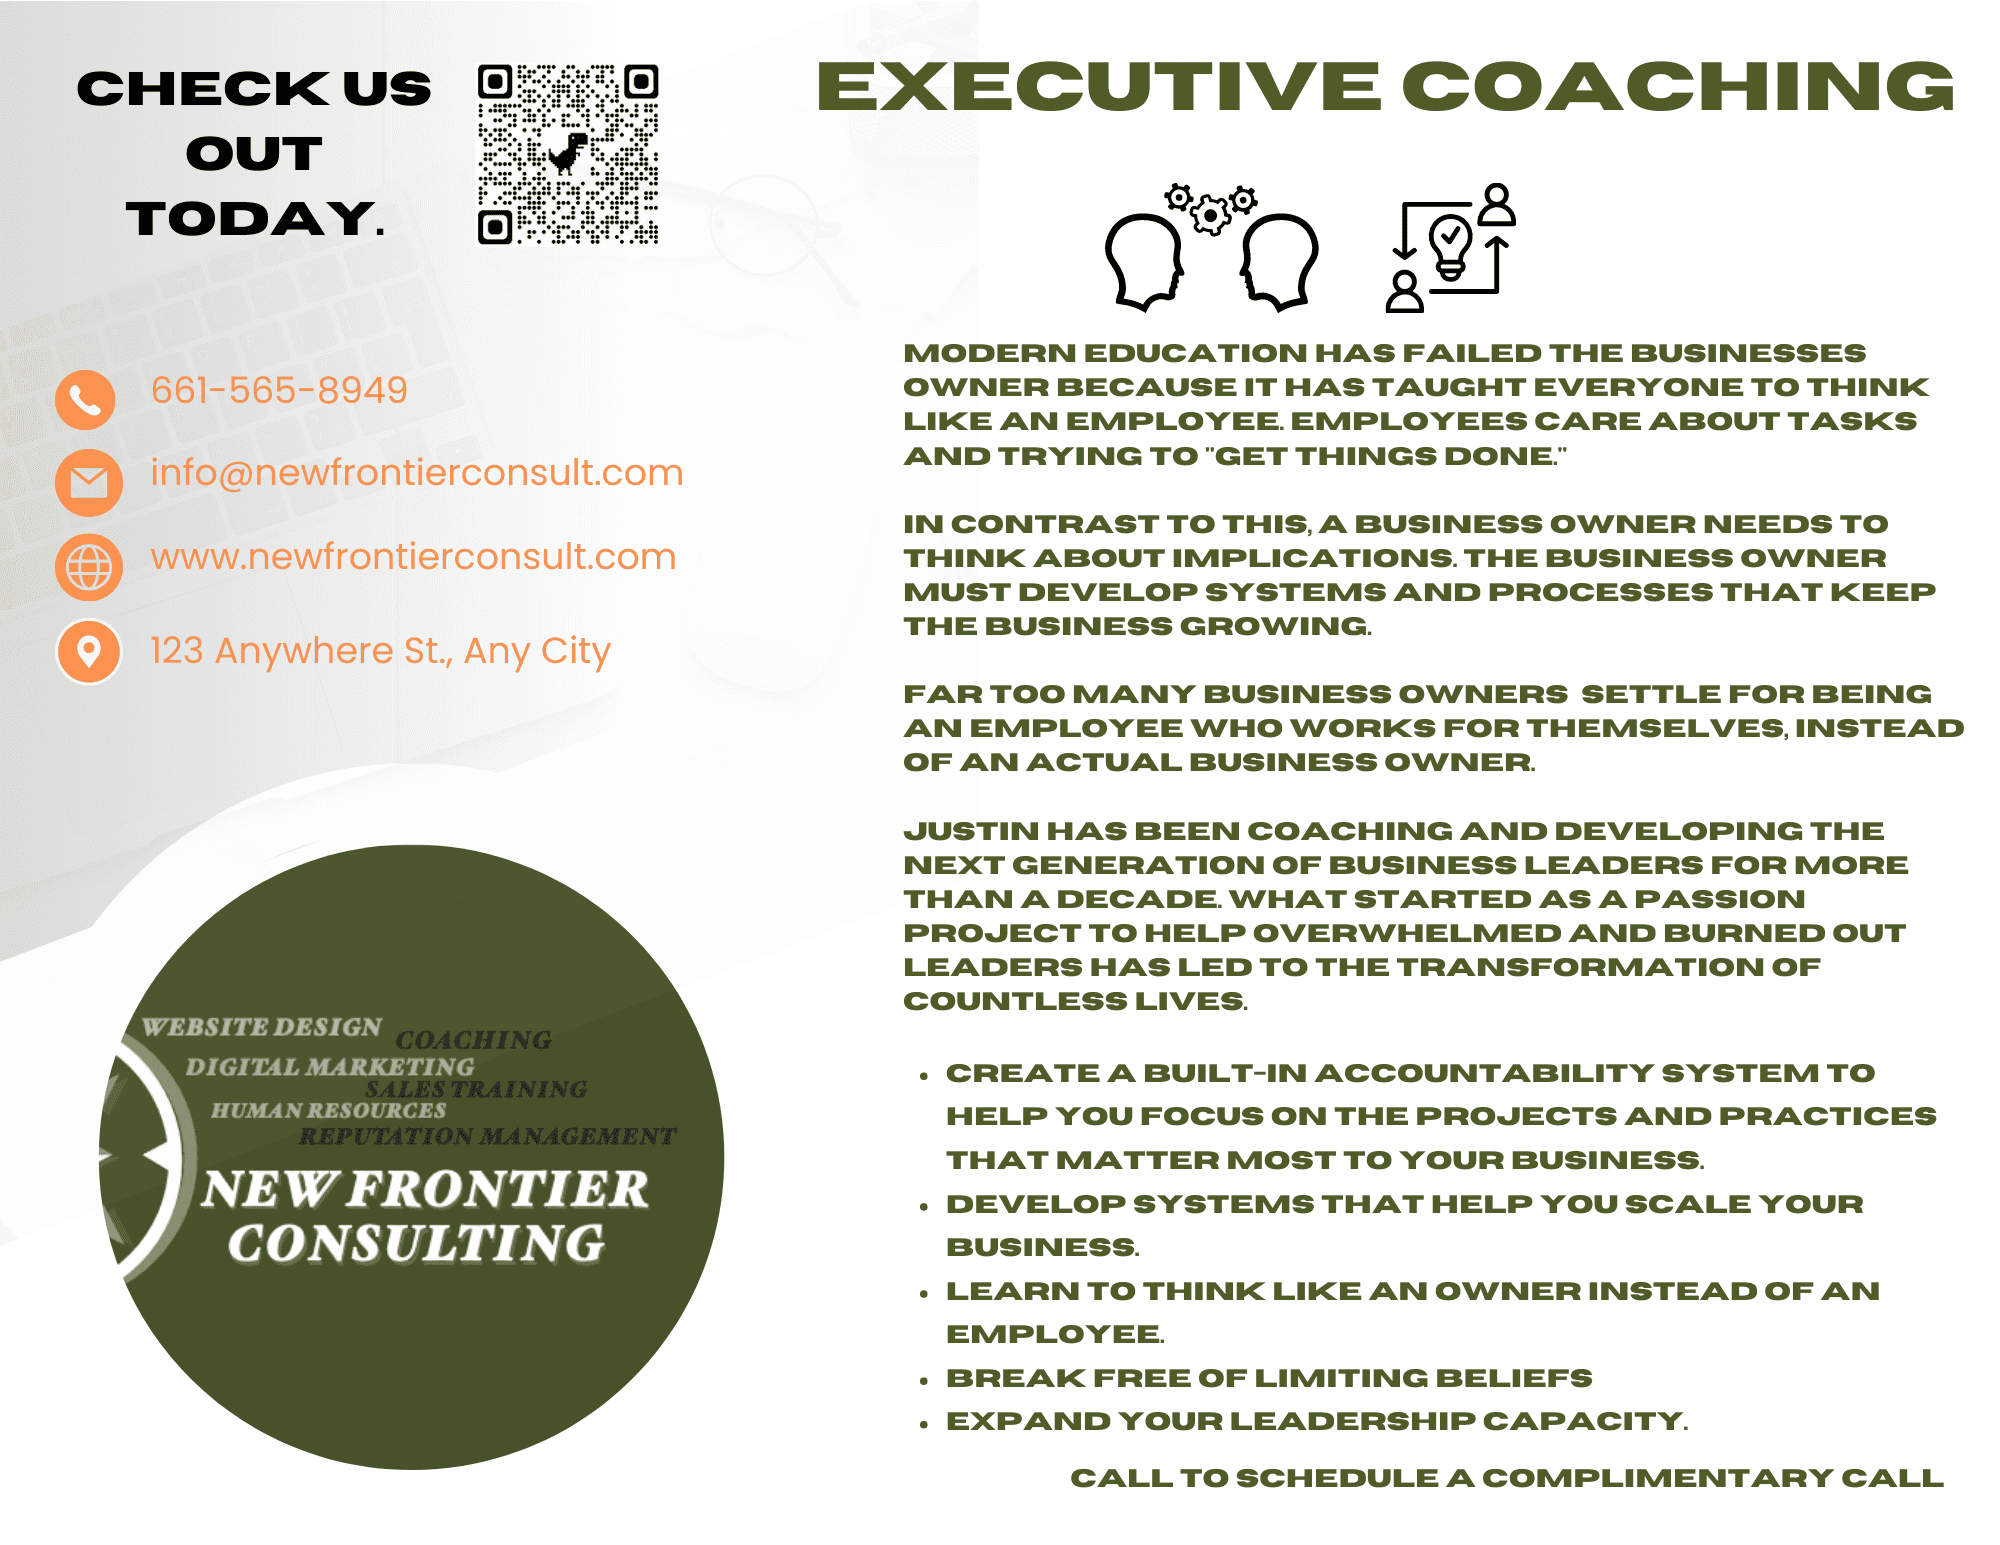 Executive Coaching Overview Product Information Image